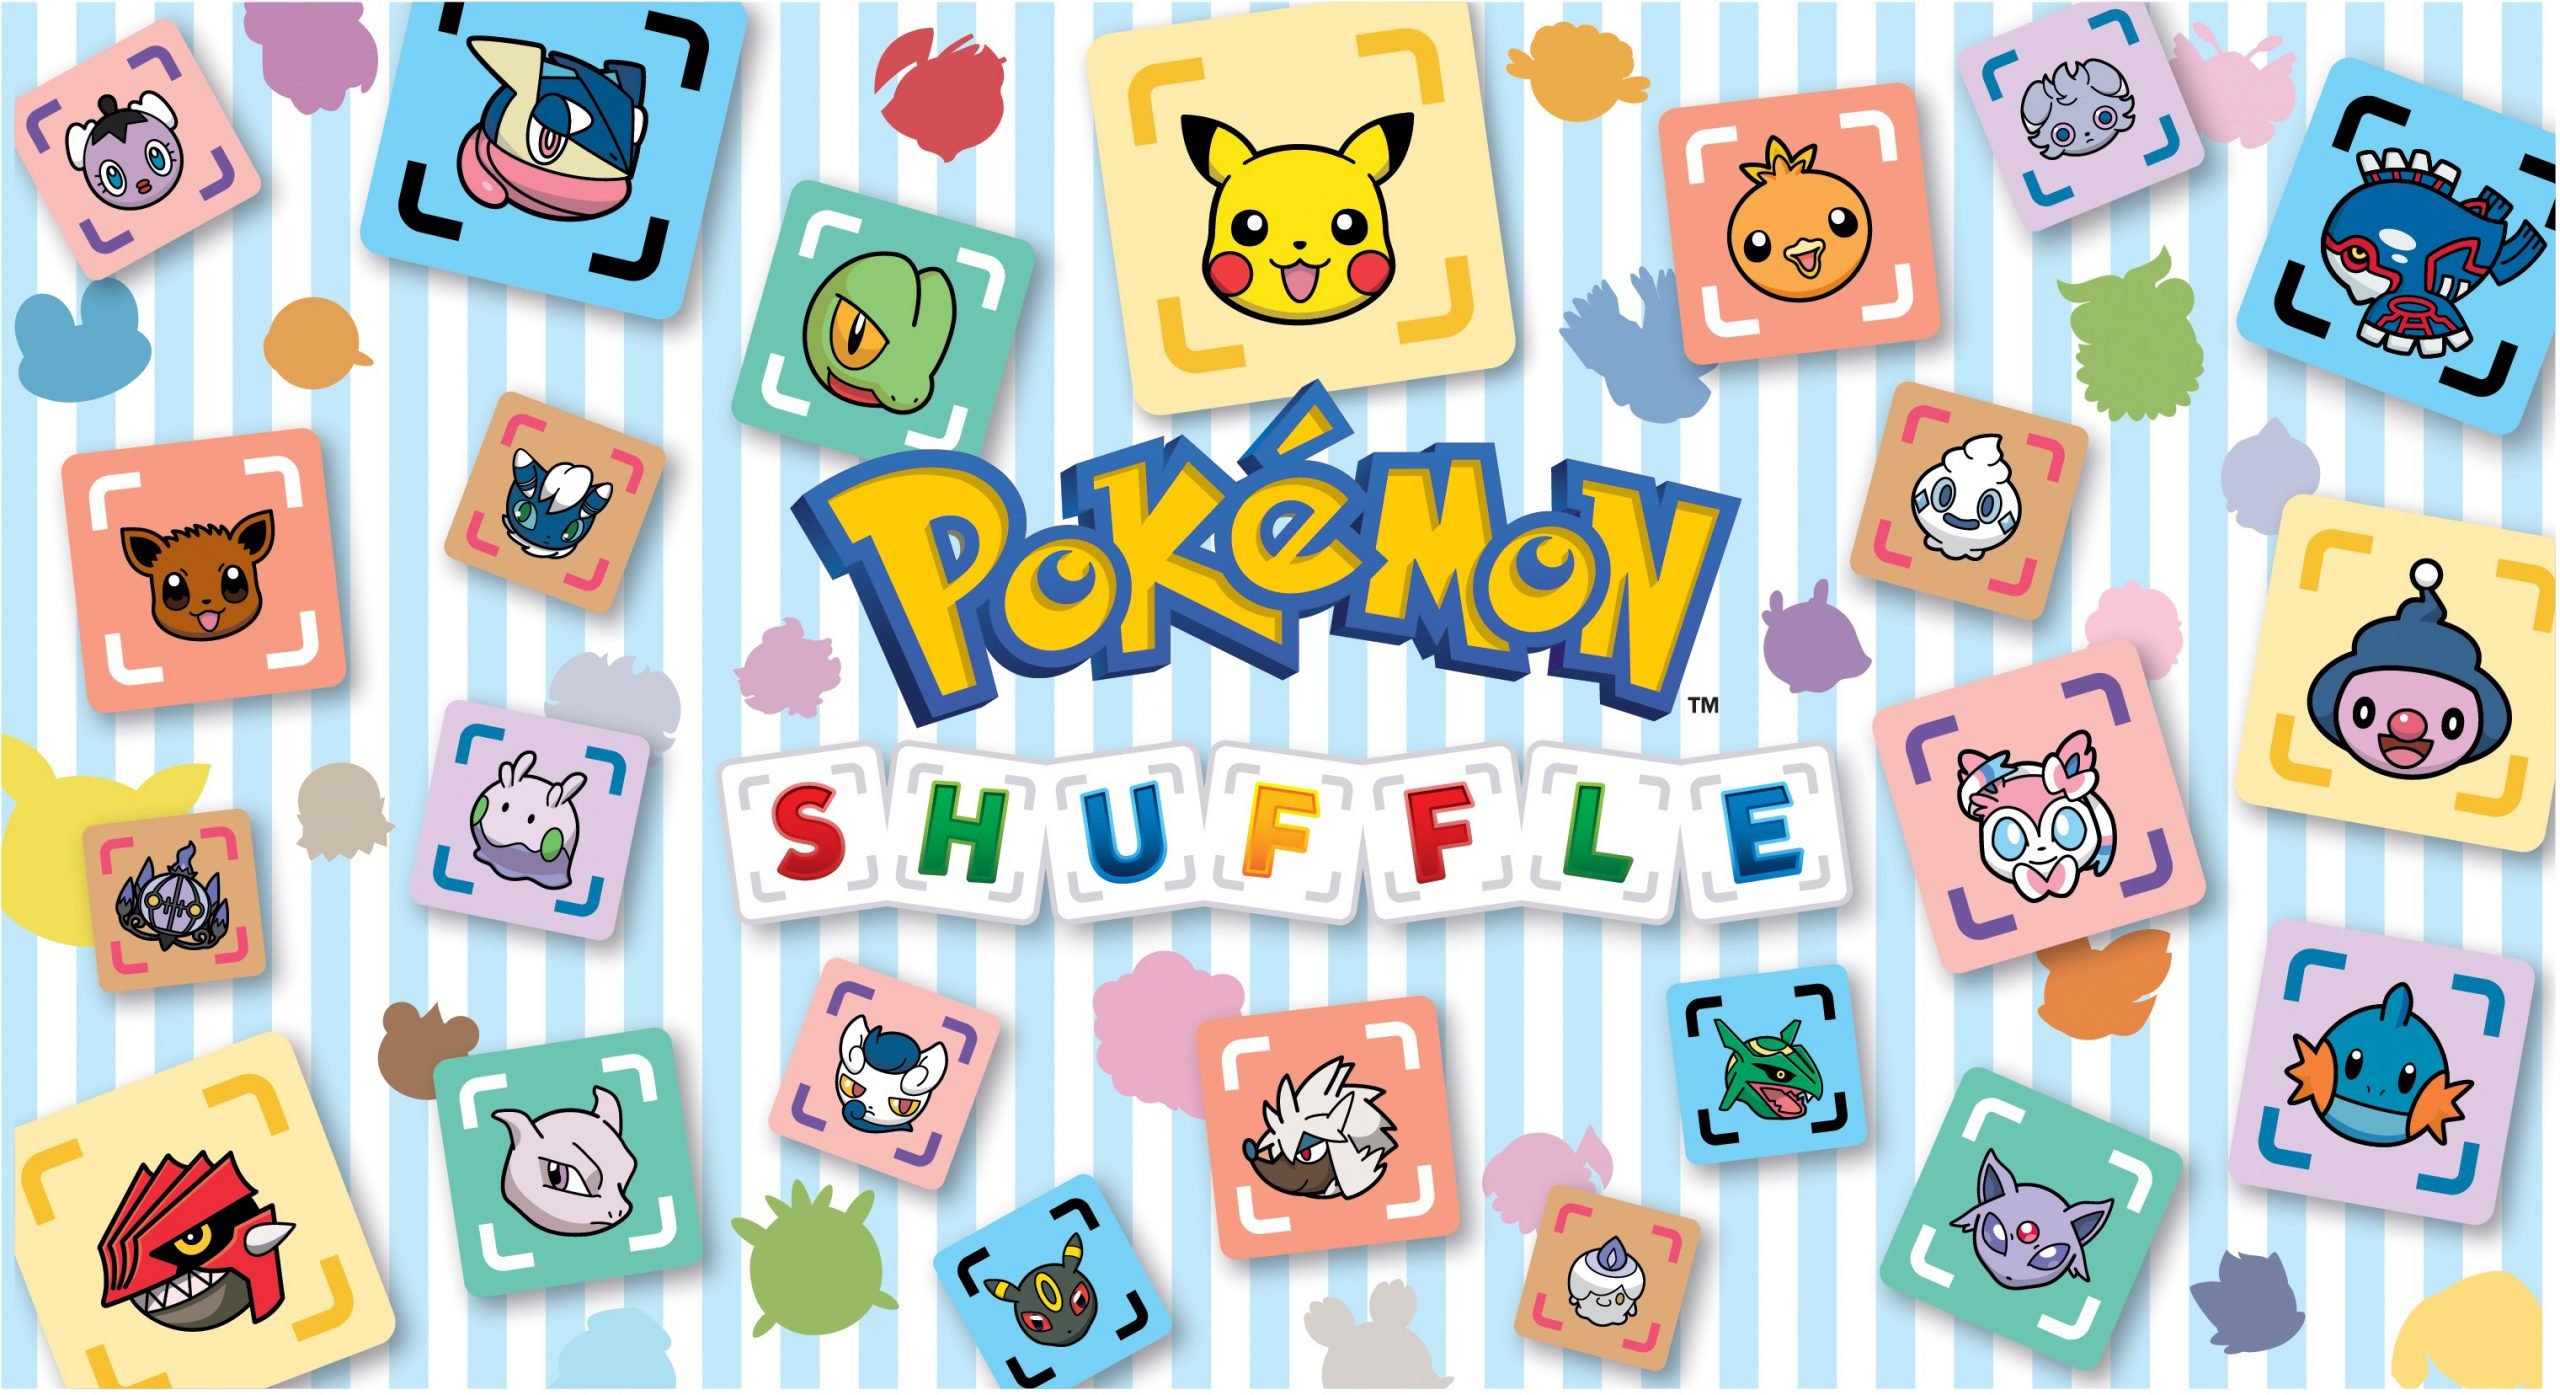 Pokemon Shuffle is Now Available on iOS and Android